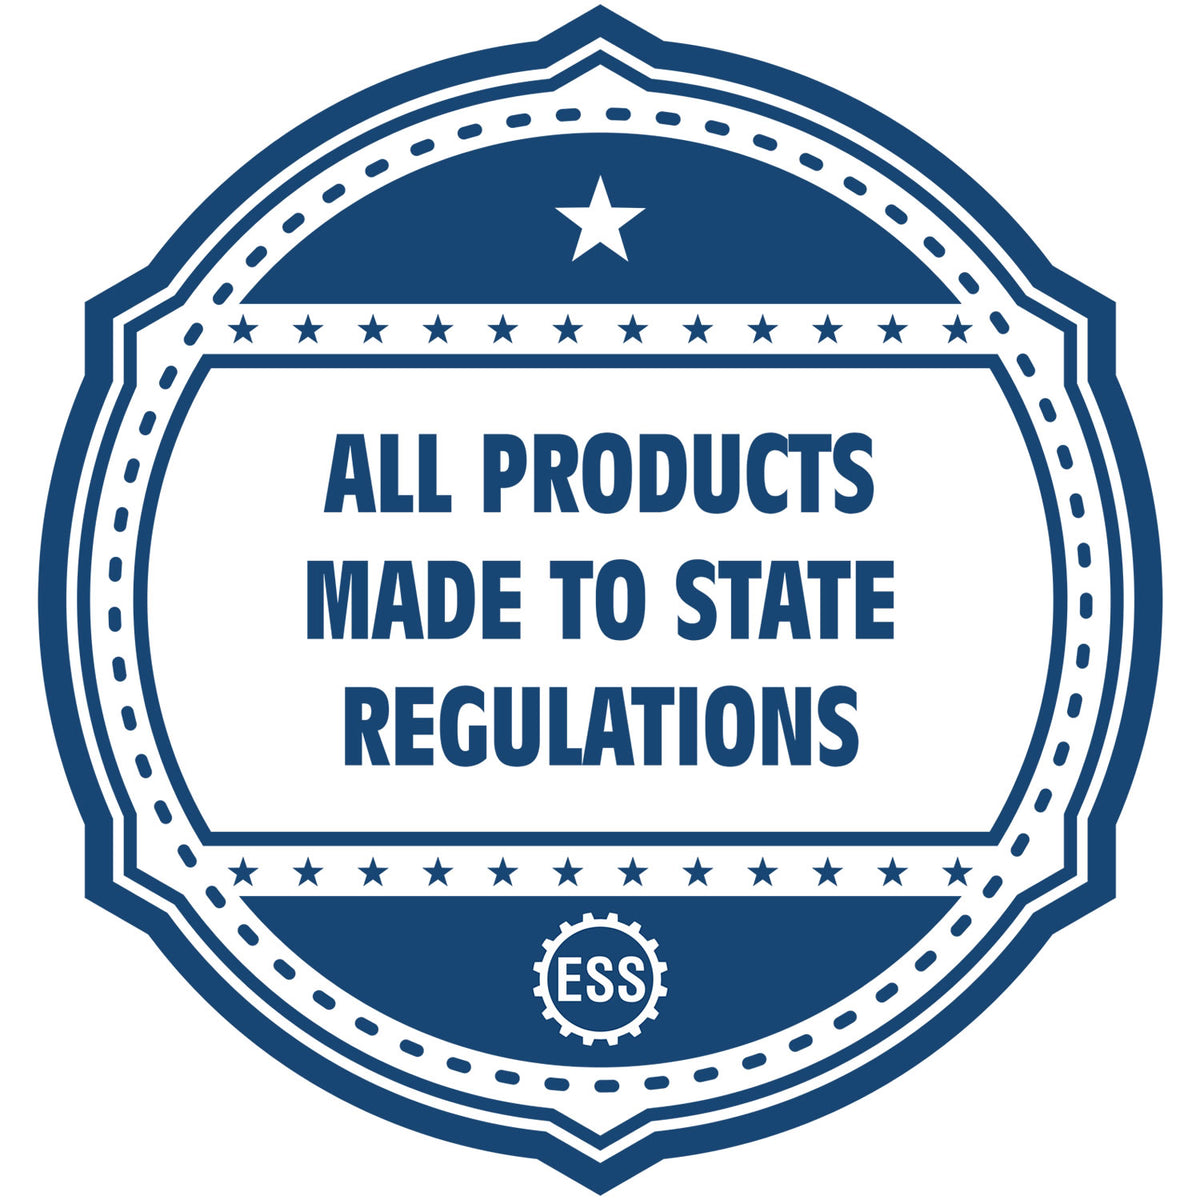 An icon or badge element for the Digital Wyoming PE Stamp and Electronic Seal for Wyoming Engineer showing that this product is made in compliance with state regulations.